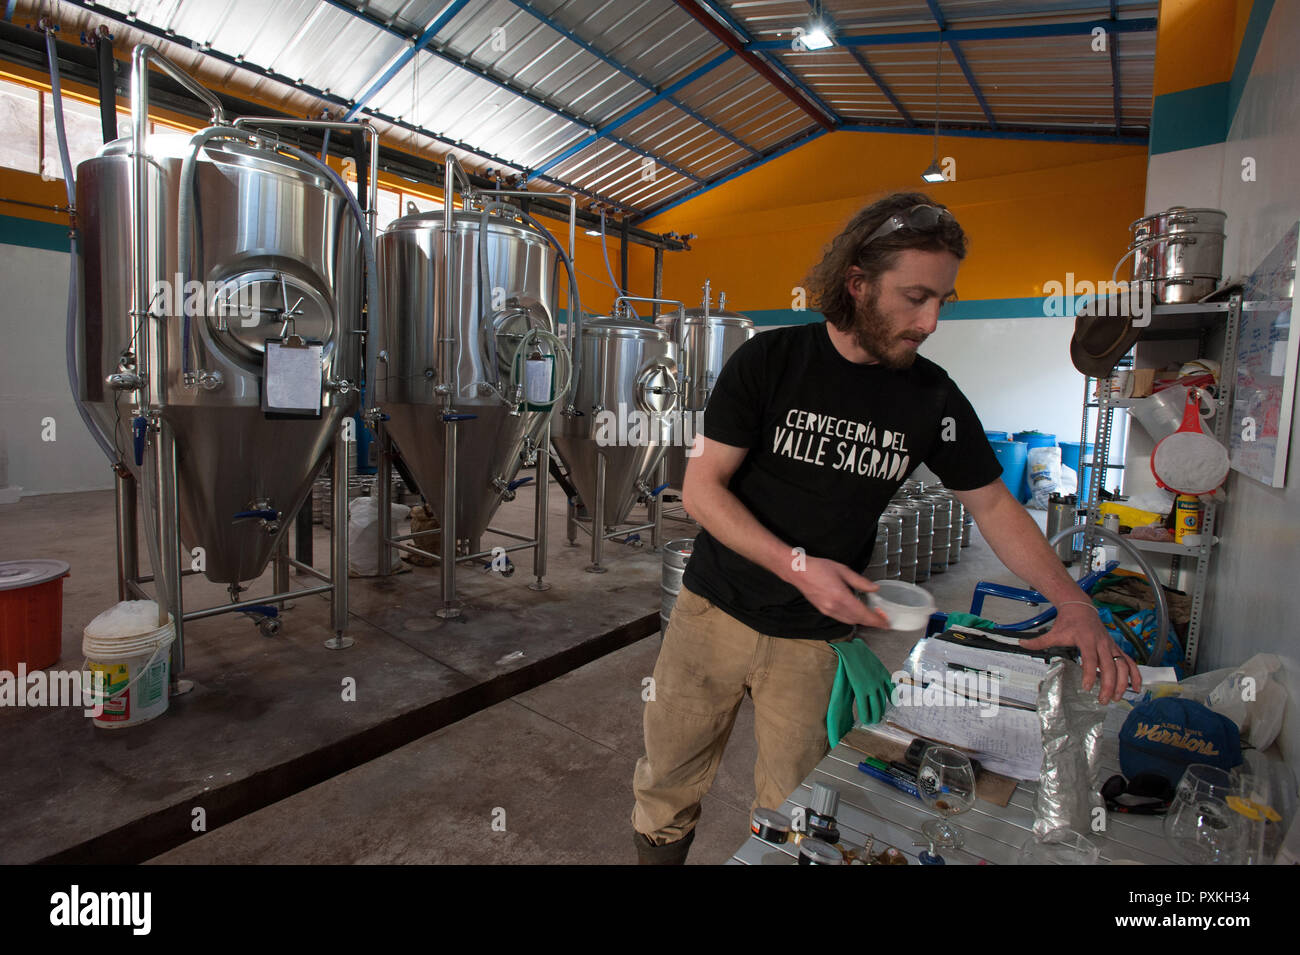 working on the production of craft beer in Cerveceria del Valle, which he created. Stock Photo